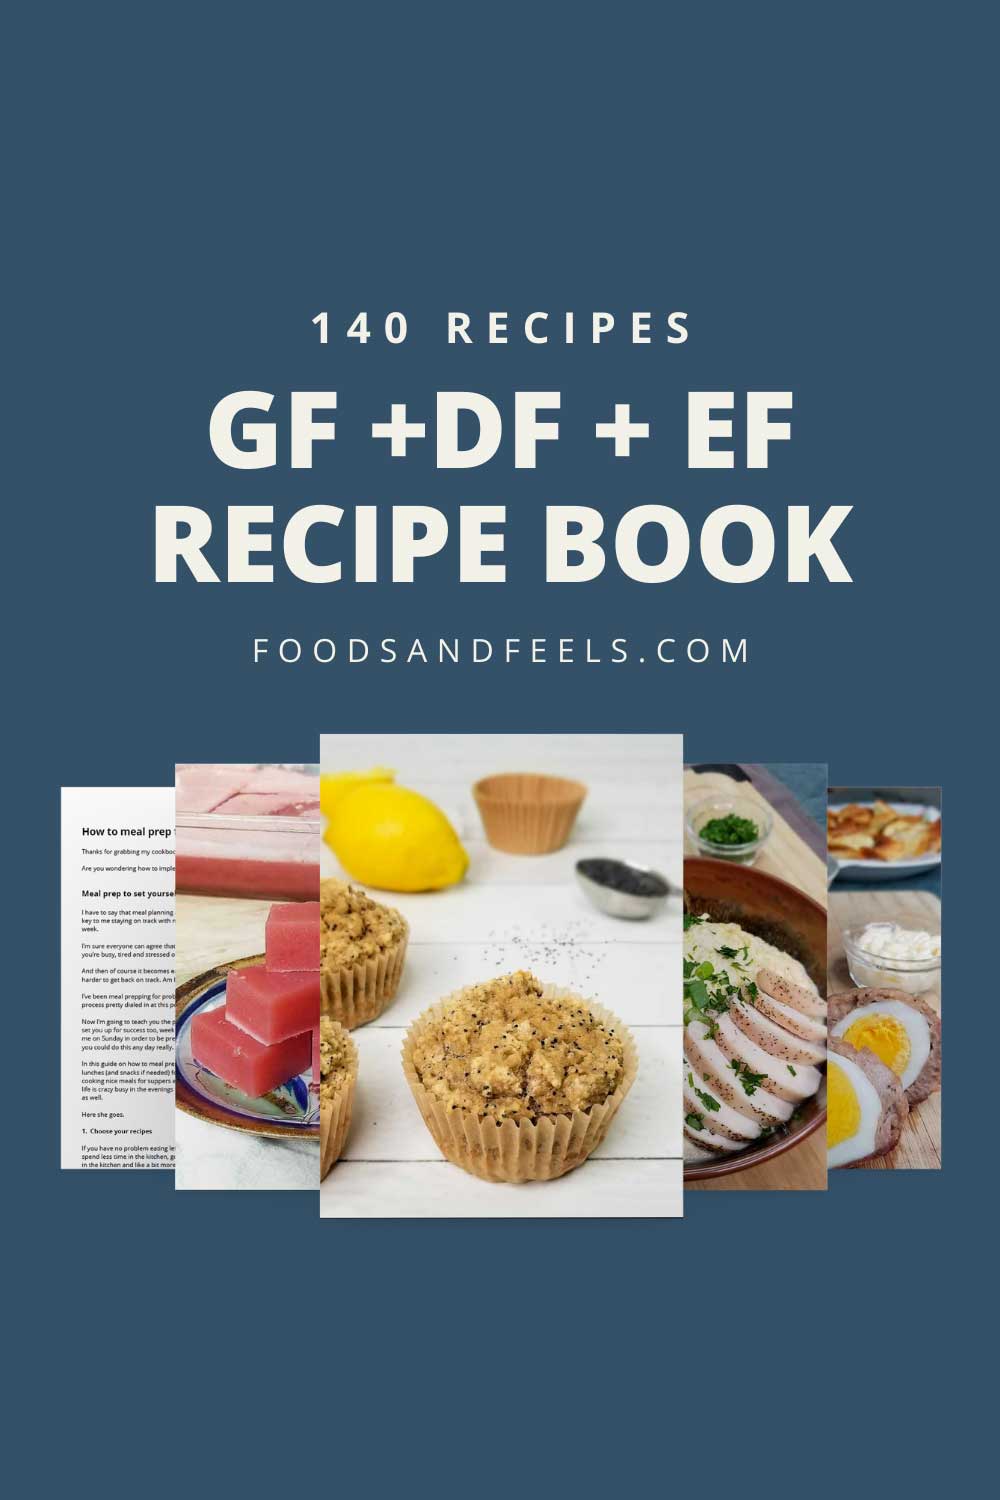 Gluten, dairy and egg free recipe book (140 recipes) â Foods + Feels ...